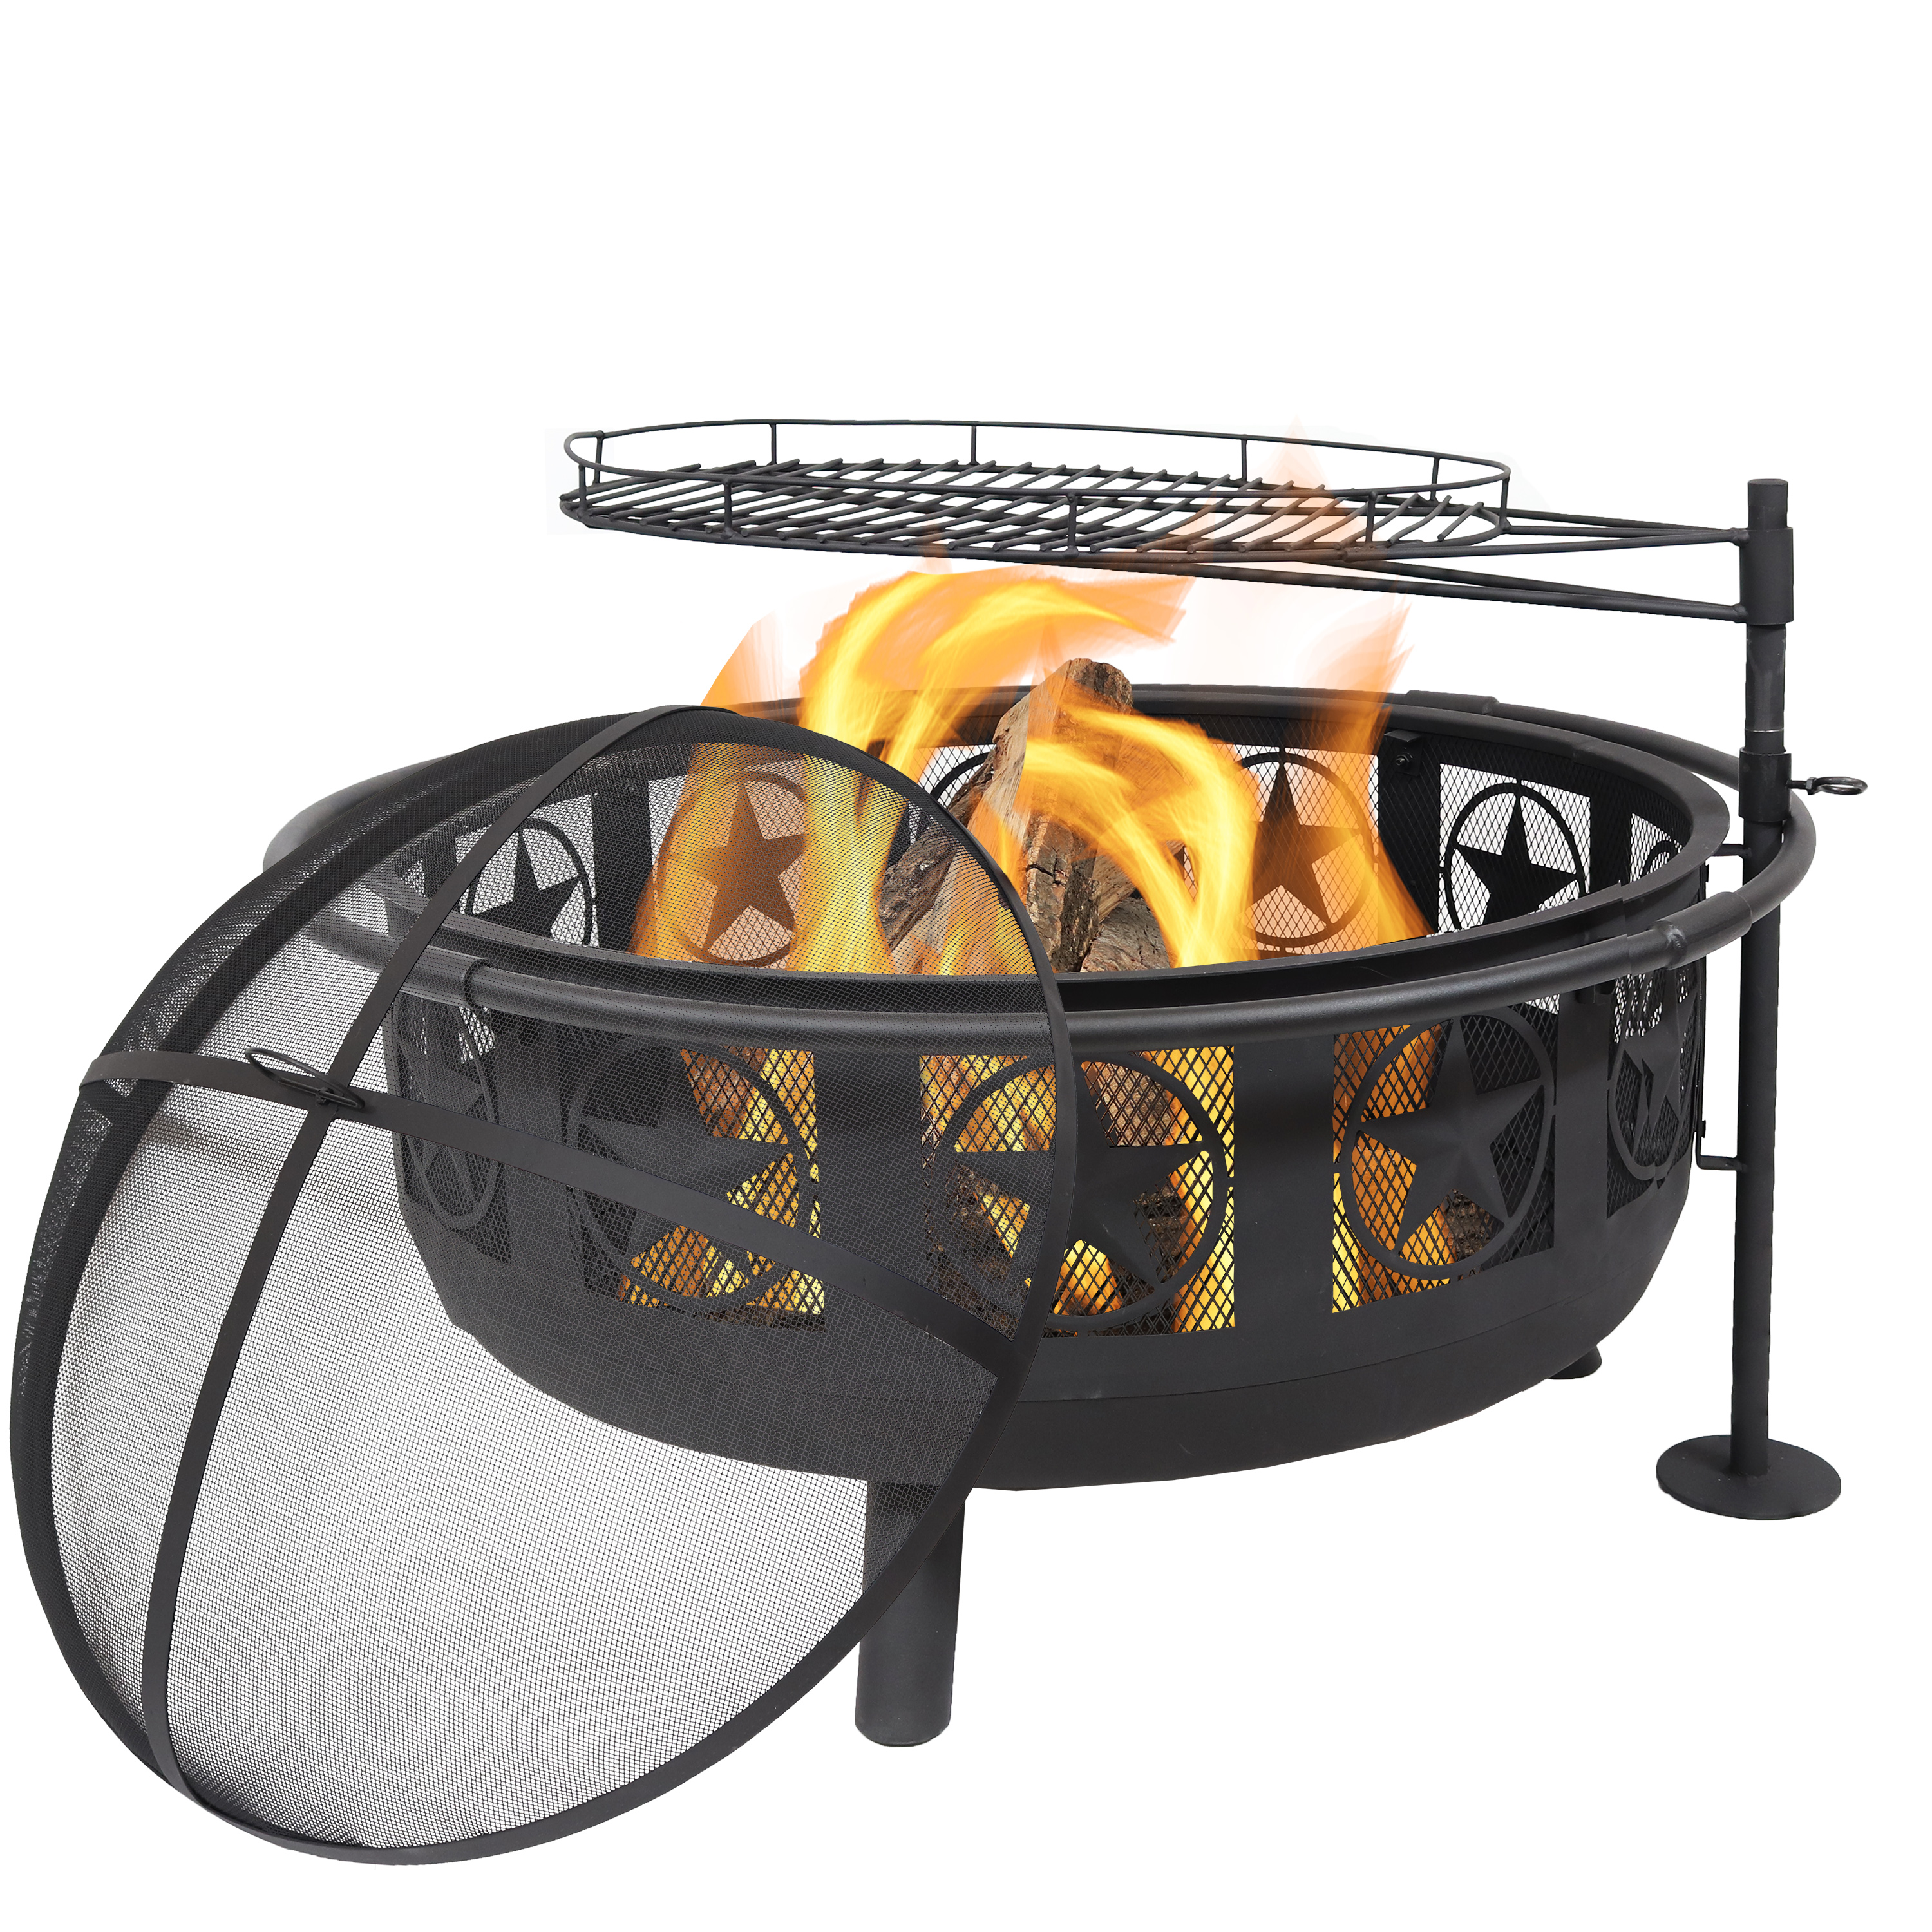 Sunnydaze Black All Star Fire Pit with Cooking Grate &amp; Spark Screen - 30-Inch